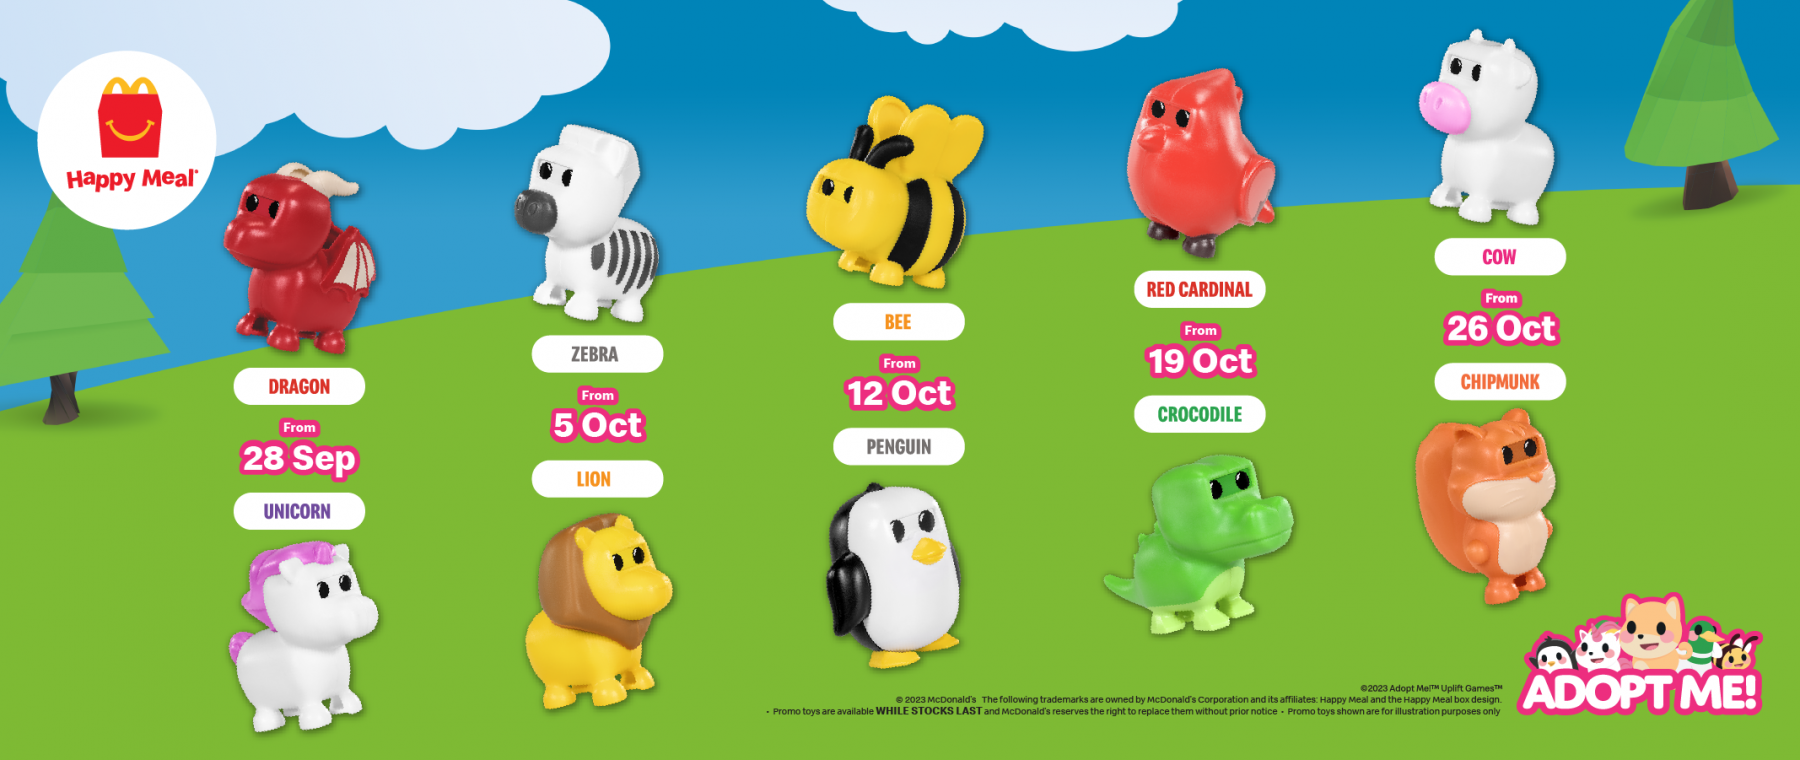 McDonald's Malaysia | Collect cute NEW friends with Adopt Me!